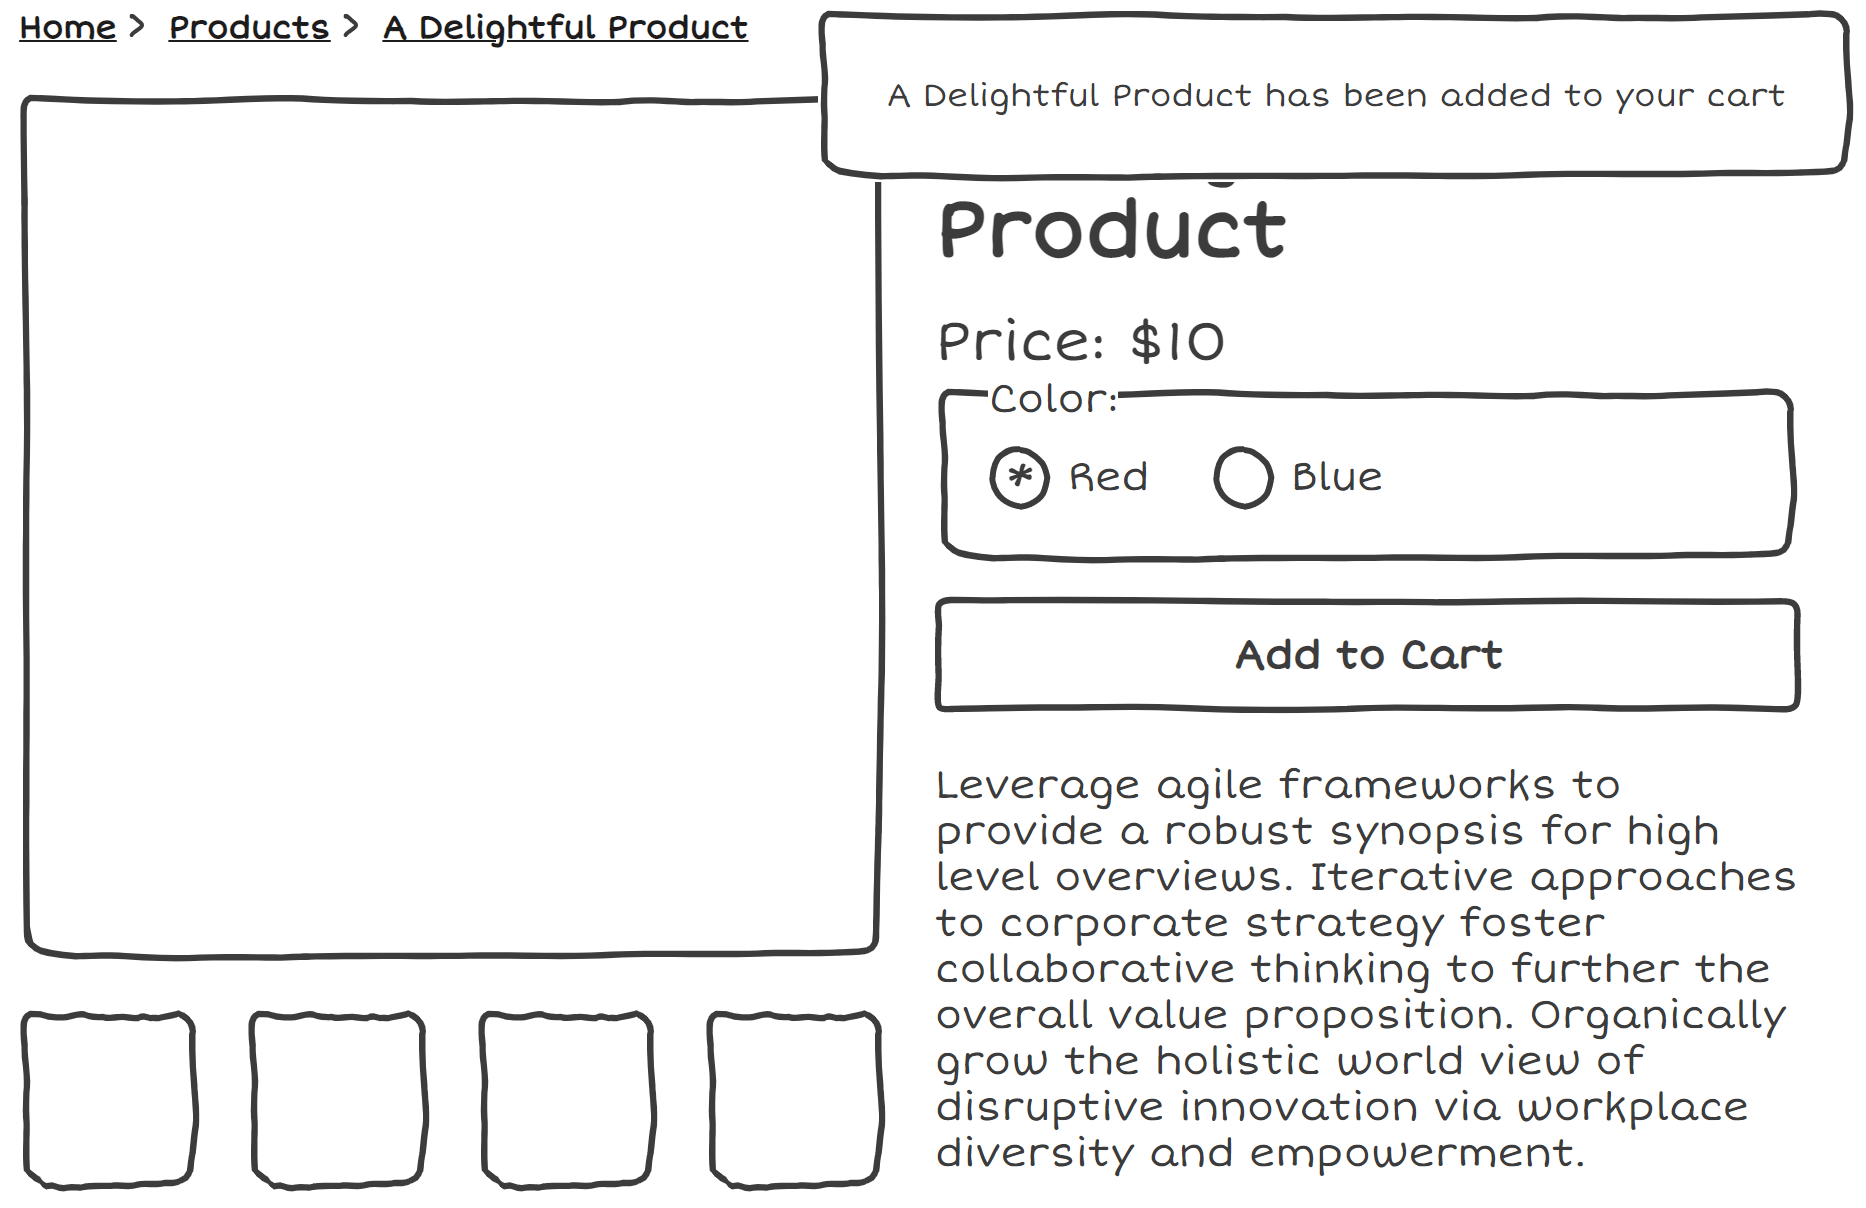 The same product page, the 'A Delightful Product has been added to your cart' now shows up in a toast message on the upper right.